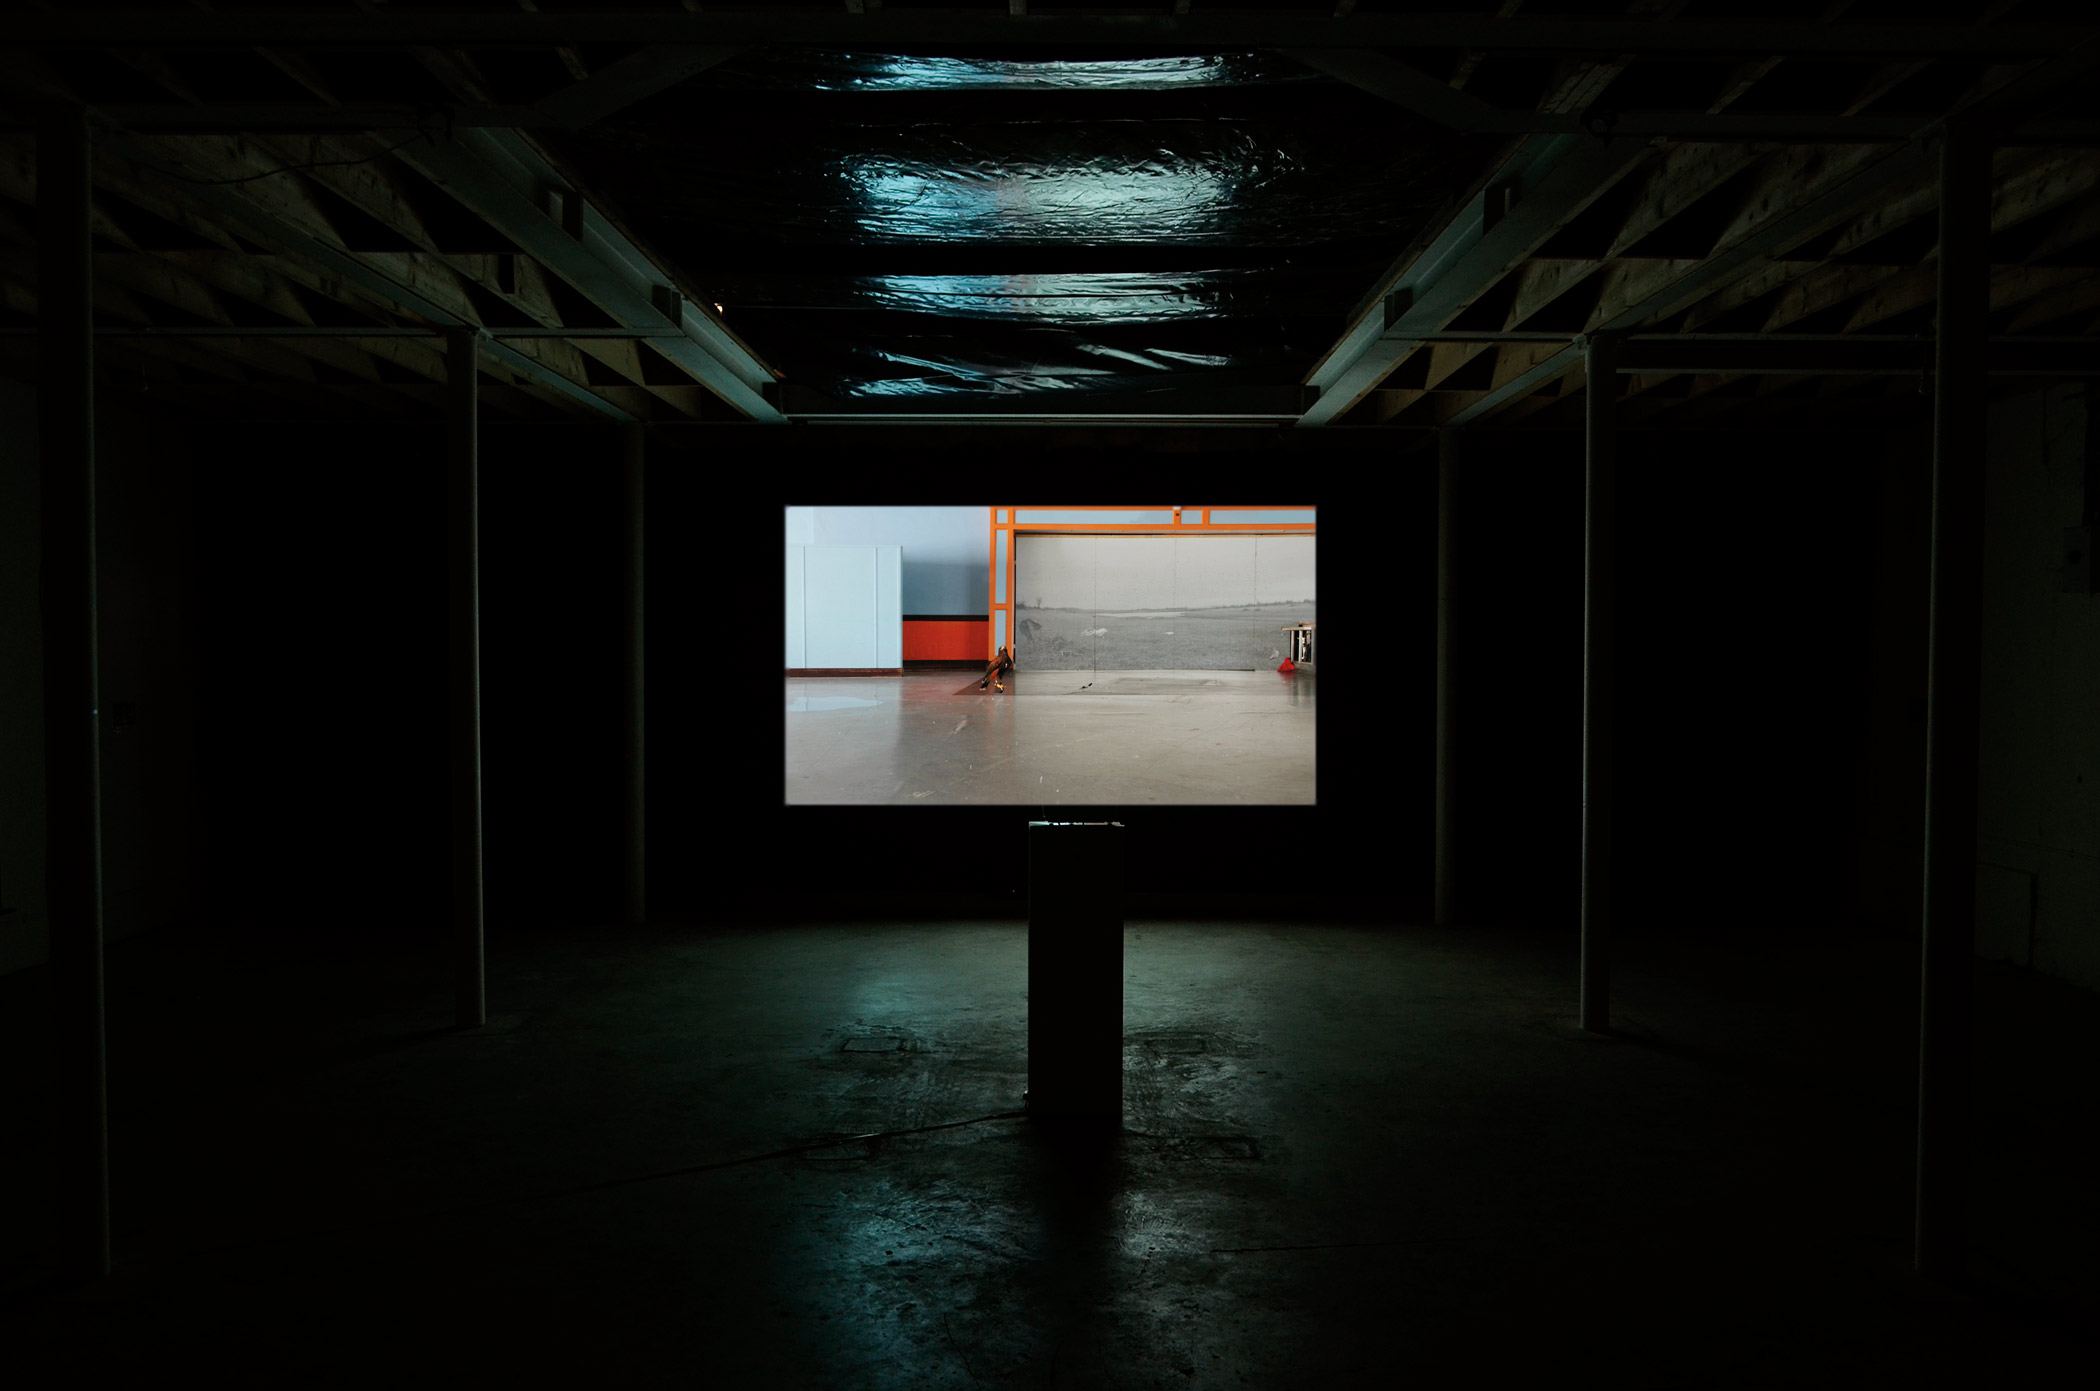 Ailbhe Ní Bhriain 'Departure' single–screen installation, video & cgi composite, colour, sound, looped, 11:48 min, sound by Pá́draig Murphy 2013/4; installation view from Ailbhe Ní Bhriain's solo exhibition at Drogheda Arts Festival, in partnership with NeXus Arts, former Methodist Schoolhouse, Drogheda, Ireland, 2015, photo by Els Borghart.